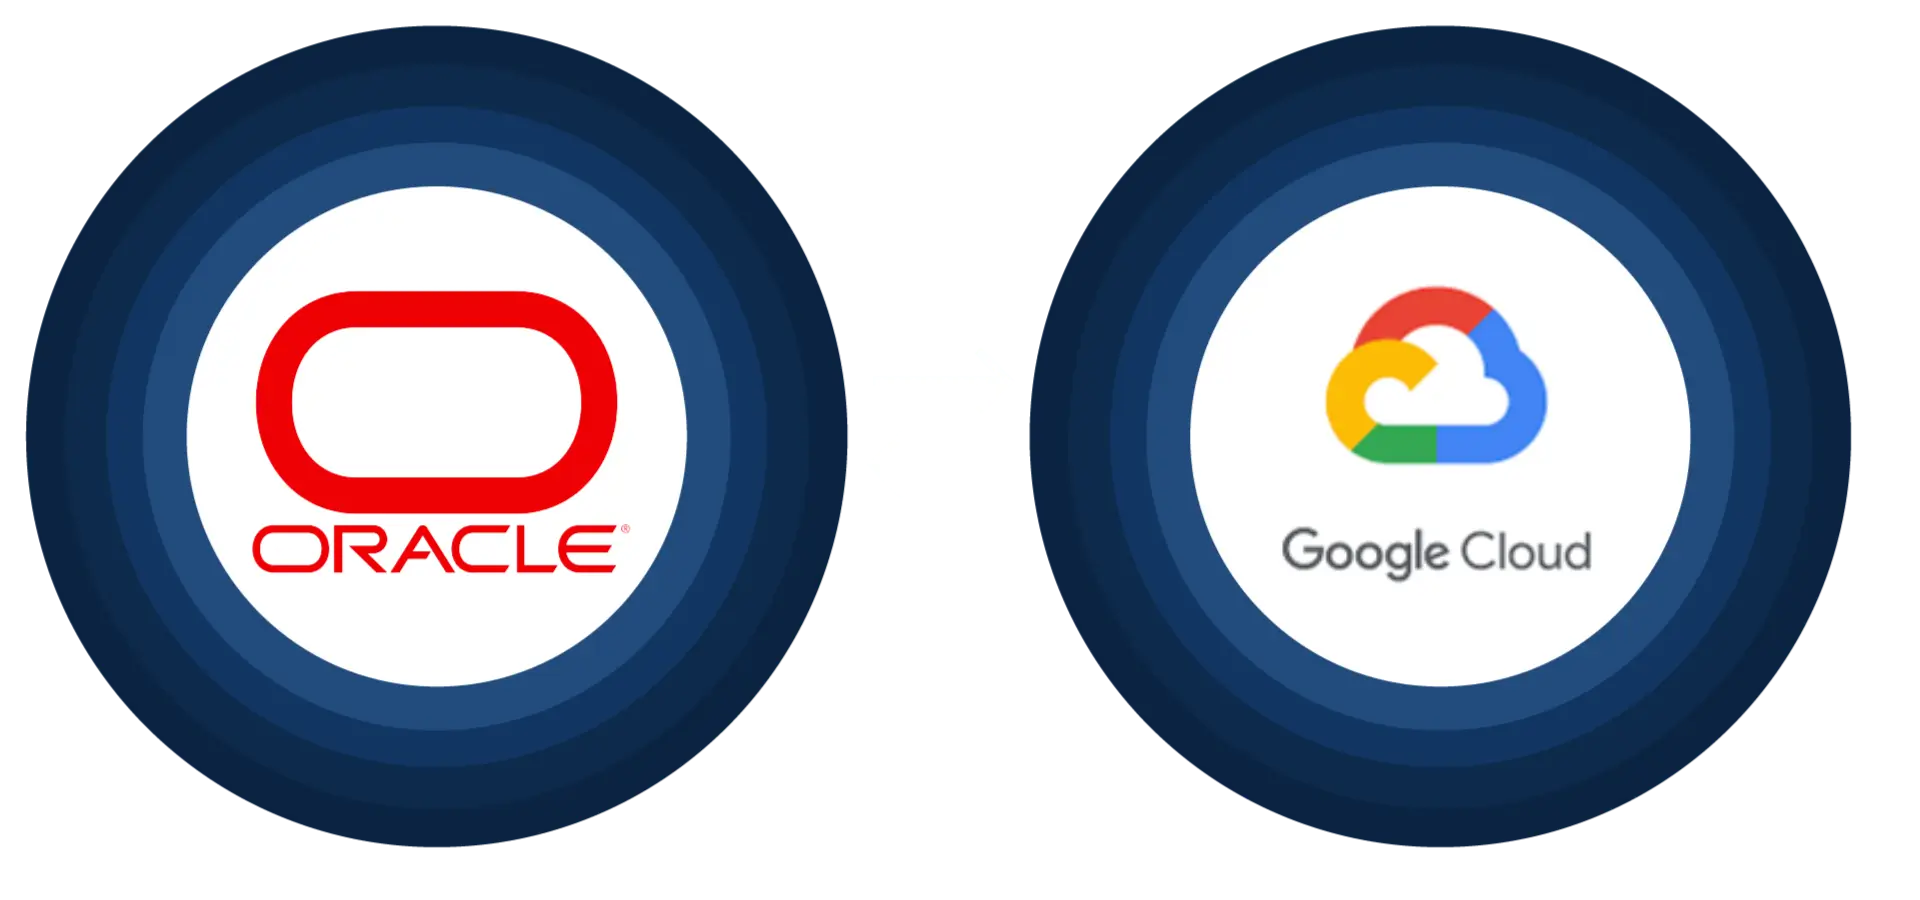 Oracle and Google Cloud